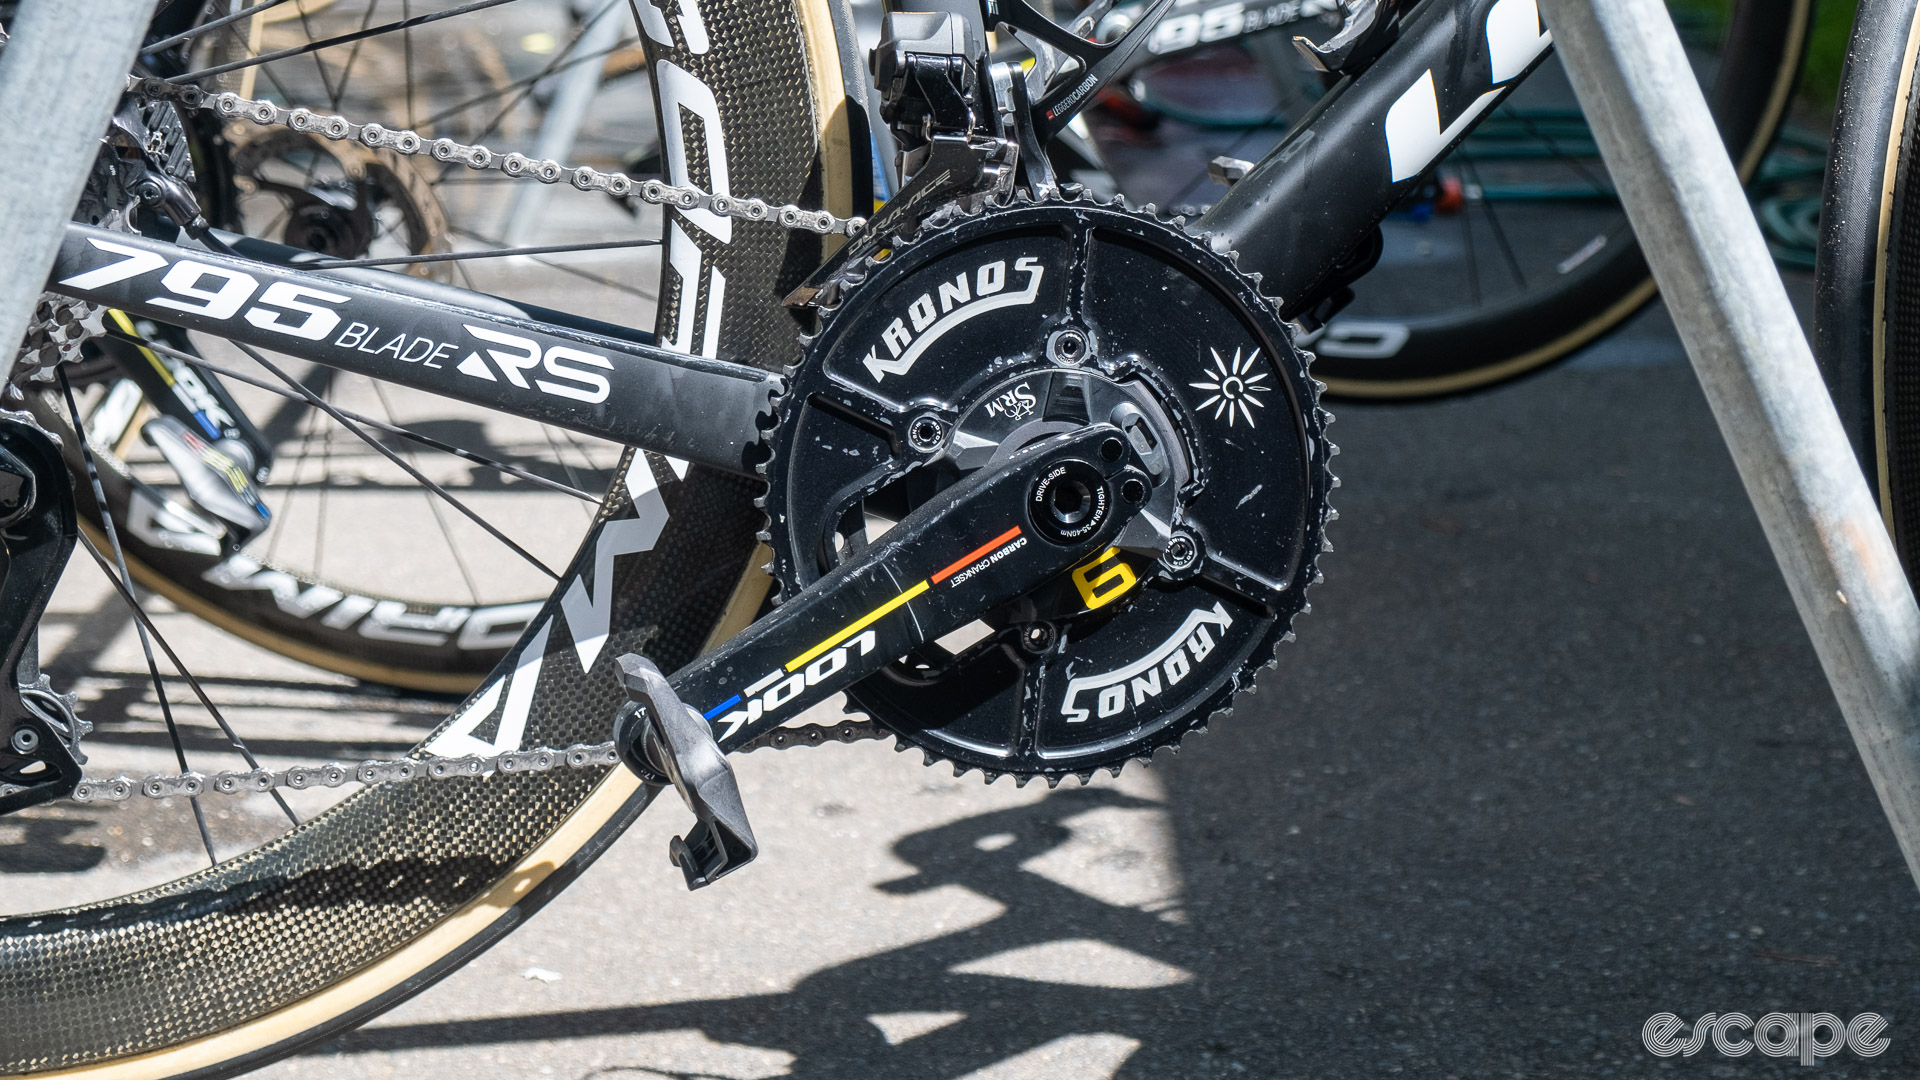 The photo shows the crank and chainrings on a Team Cofidis' Look 795 Blade RS missing its top cap.